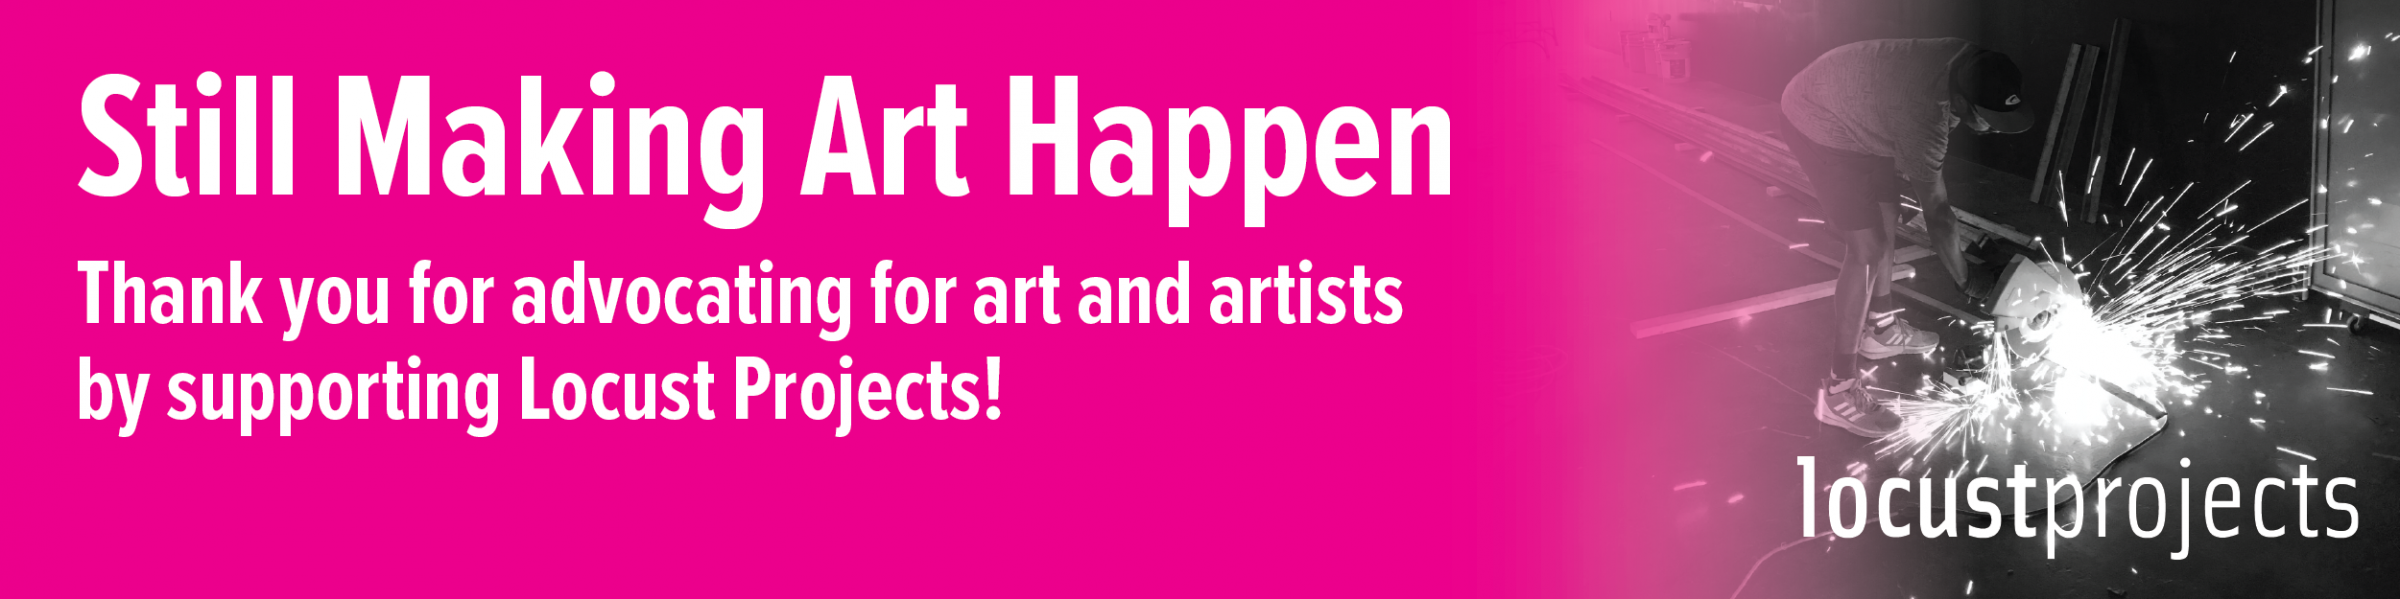 Still Making Art Happen: Action and Advocacy Campaign Spring 2020